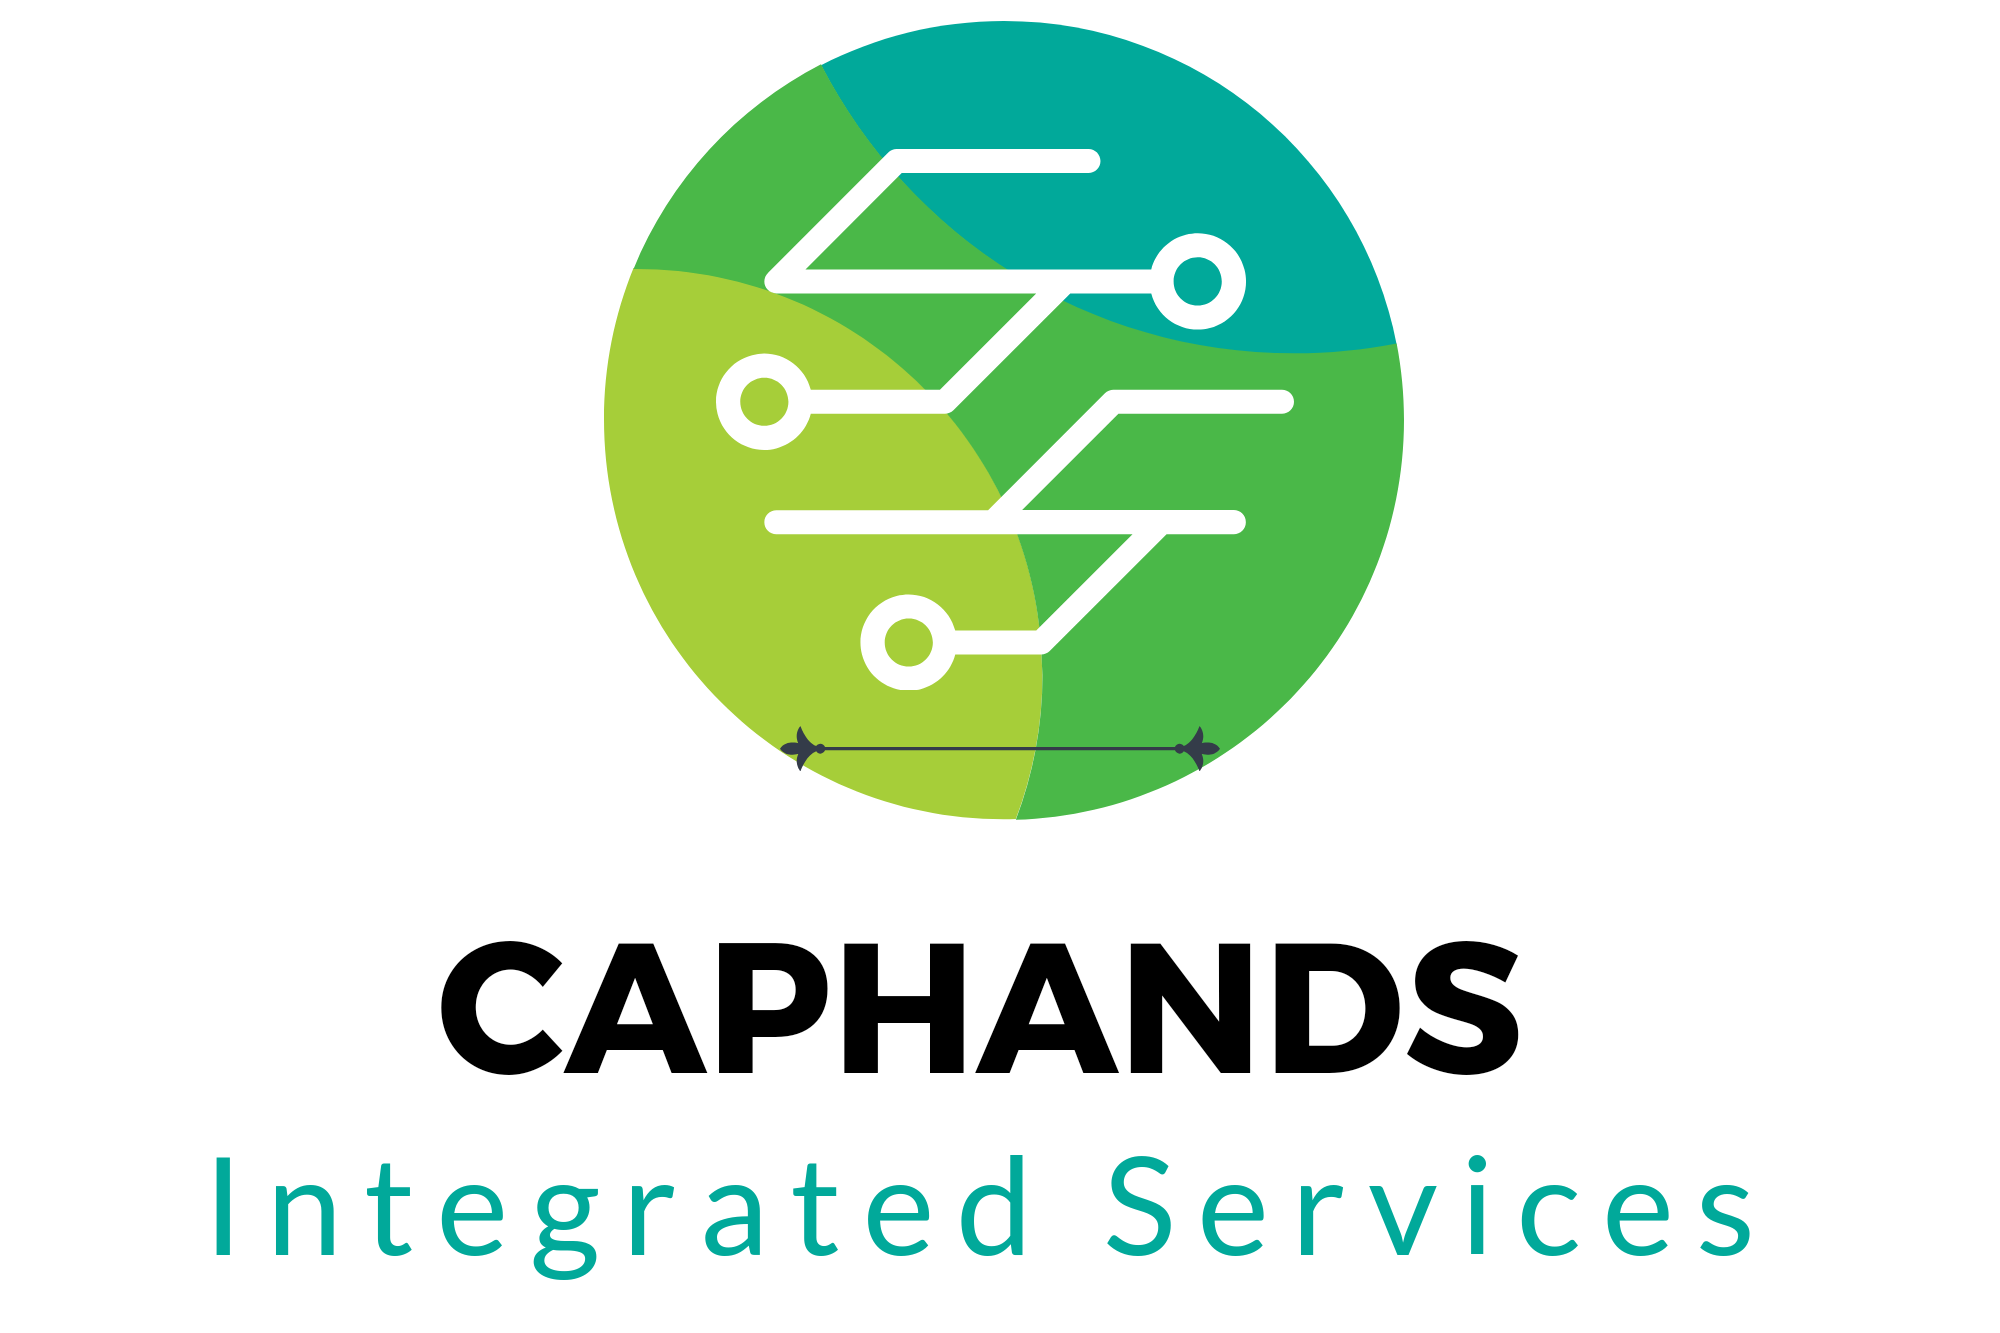 CAPHANDS INTEGRATED SERVICES